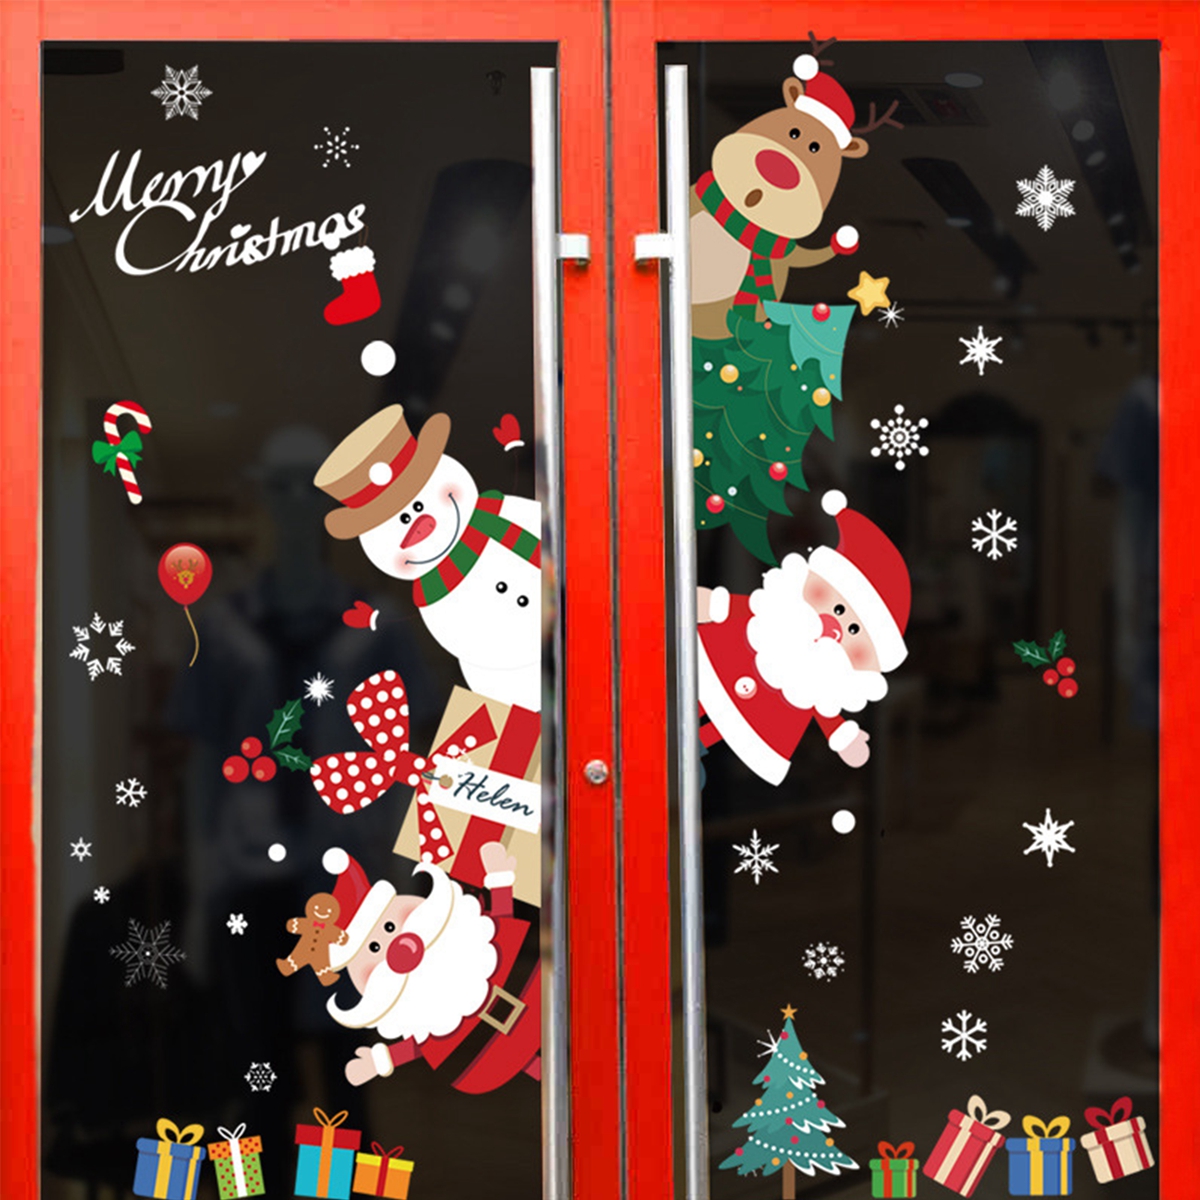 Christmas-Window-Stickers-Christmas-Wall-Sticker-Kids-Room-Wall-Decals-Merry-Christmas-Decorations-For-Home-New